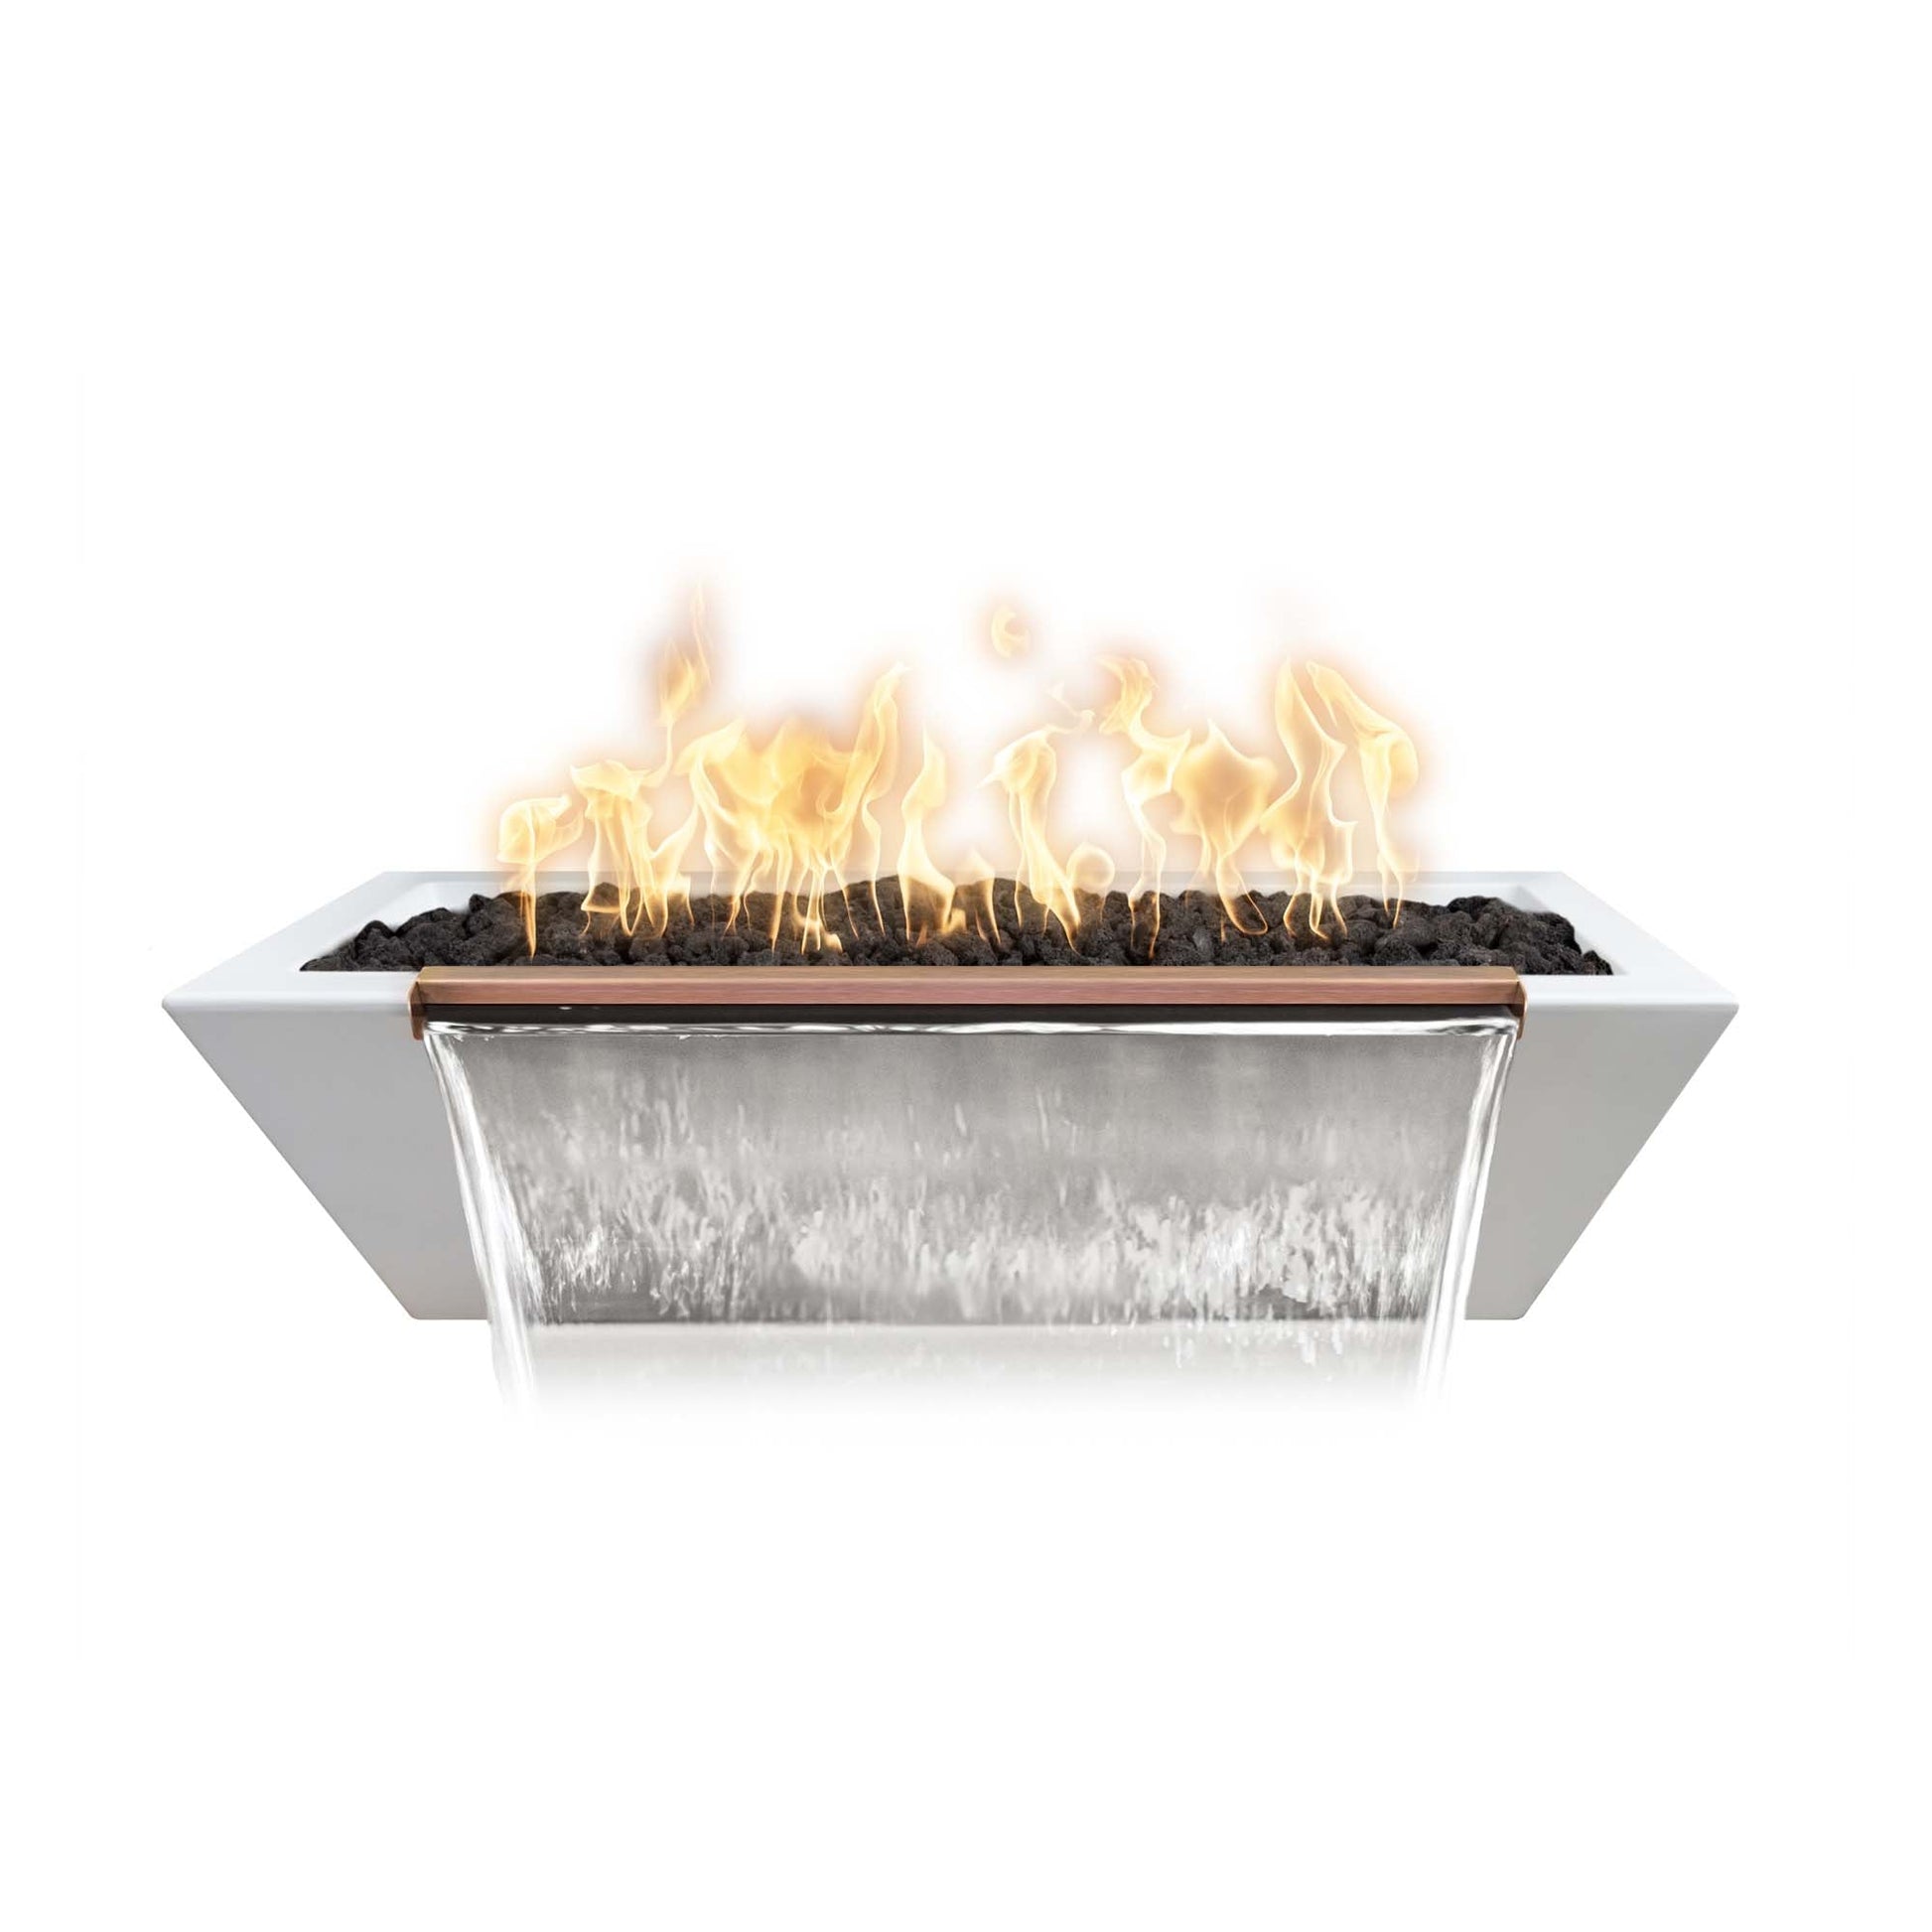 The Outdoor Plus Linear Maya 72" Gray GFRC Concrete Liquid Propane Fire & Water Bowl with Match Lit Ignition